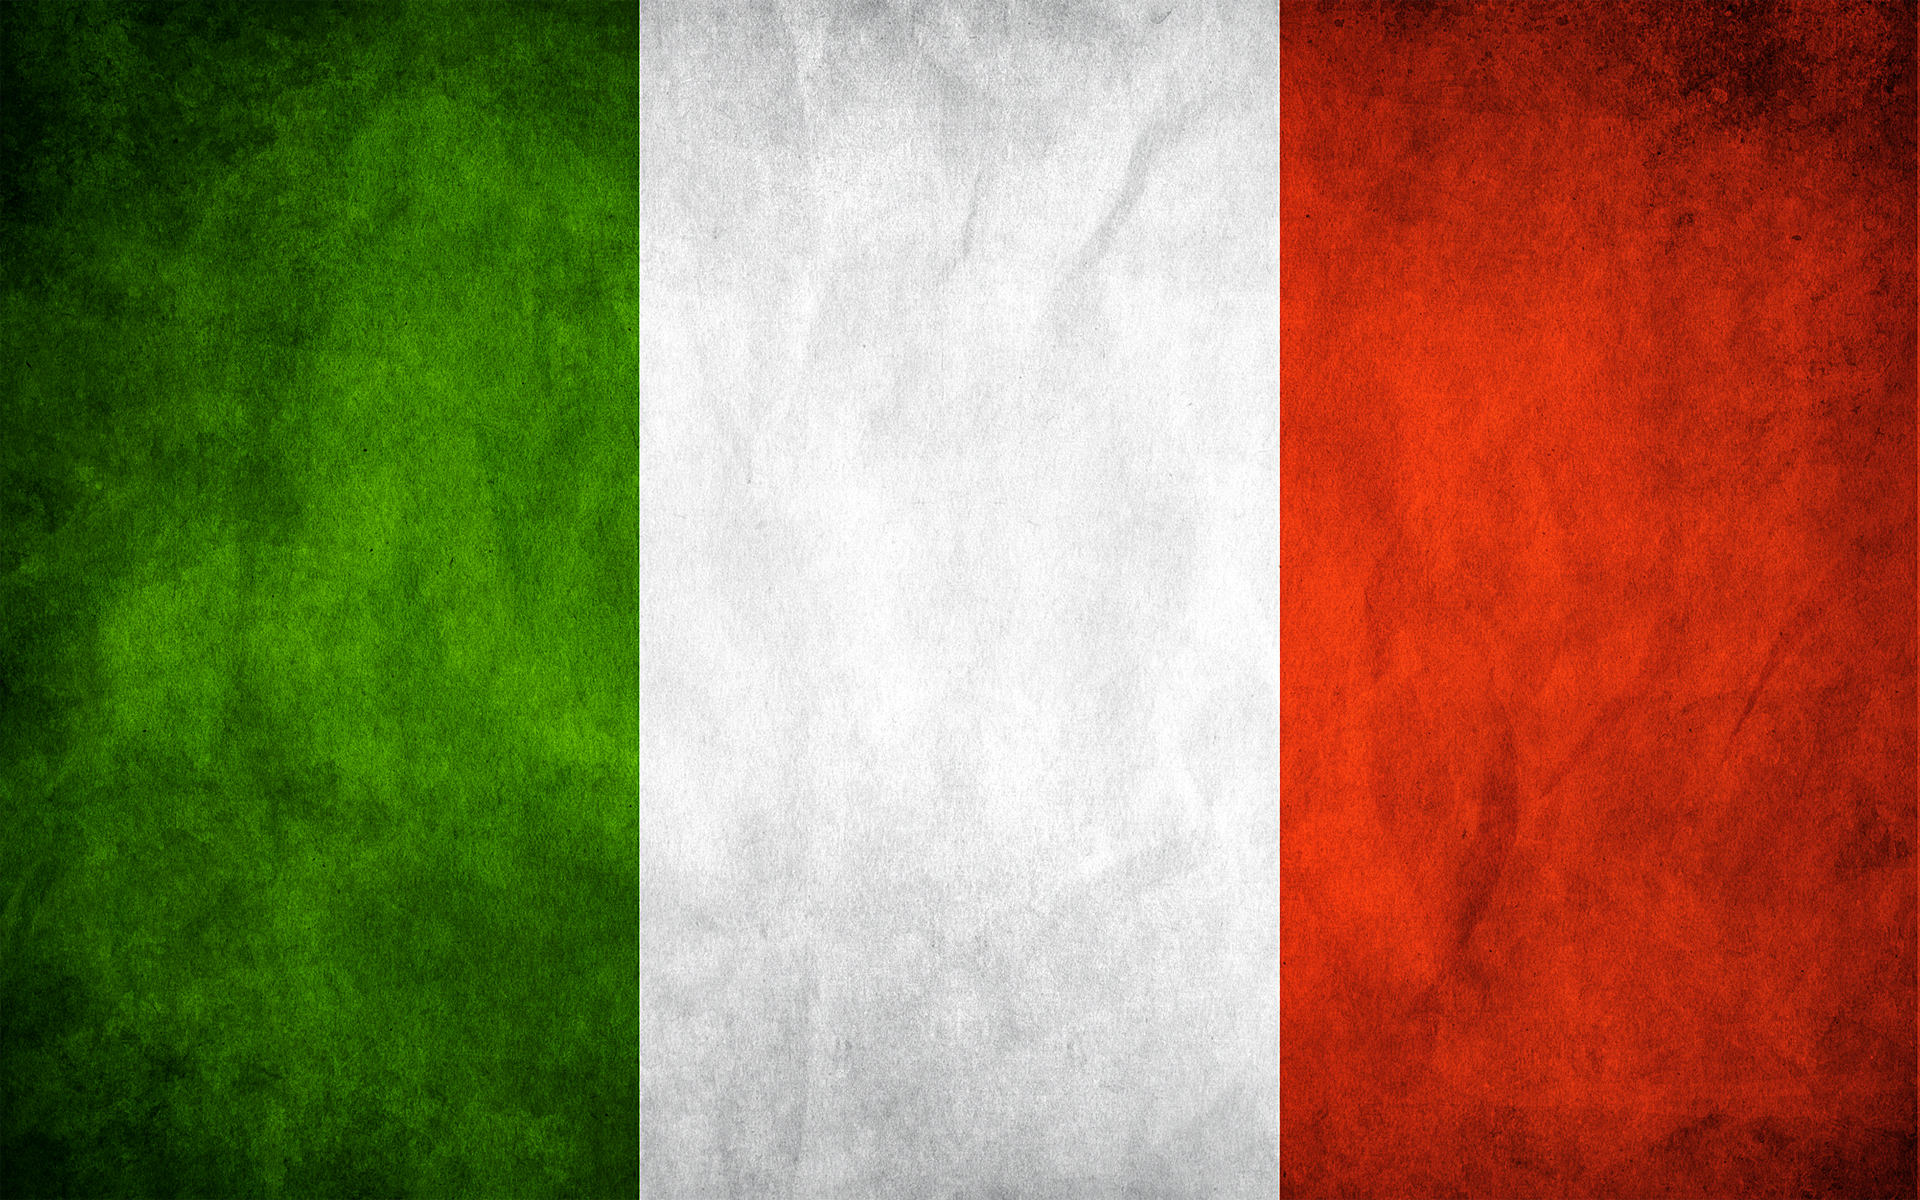  parte wallpapers imagenes think0 gales italy flag italia 1920x1200